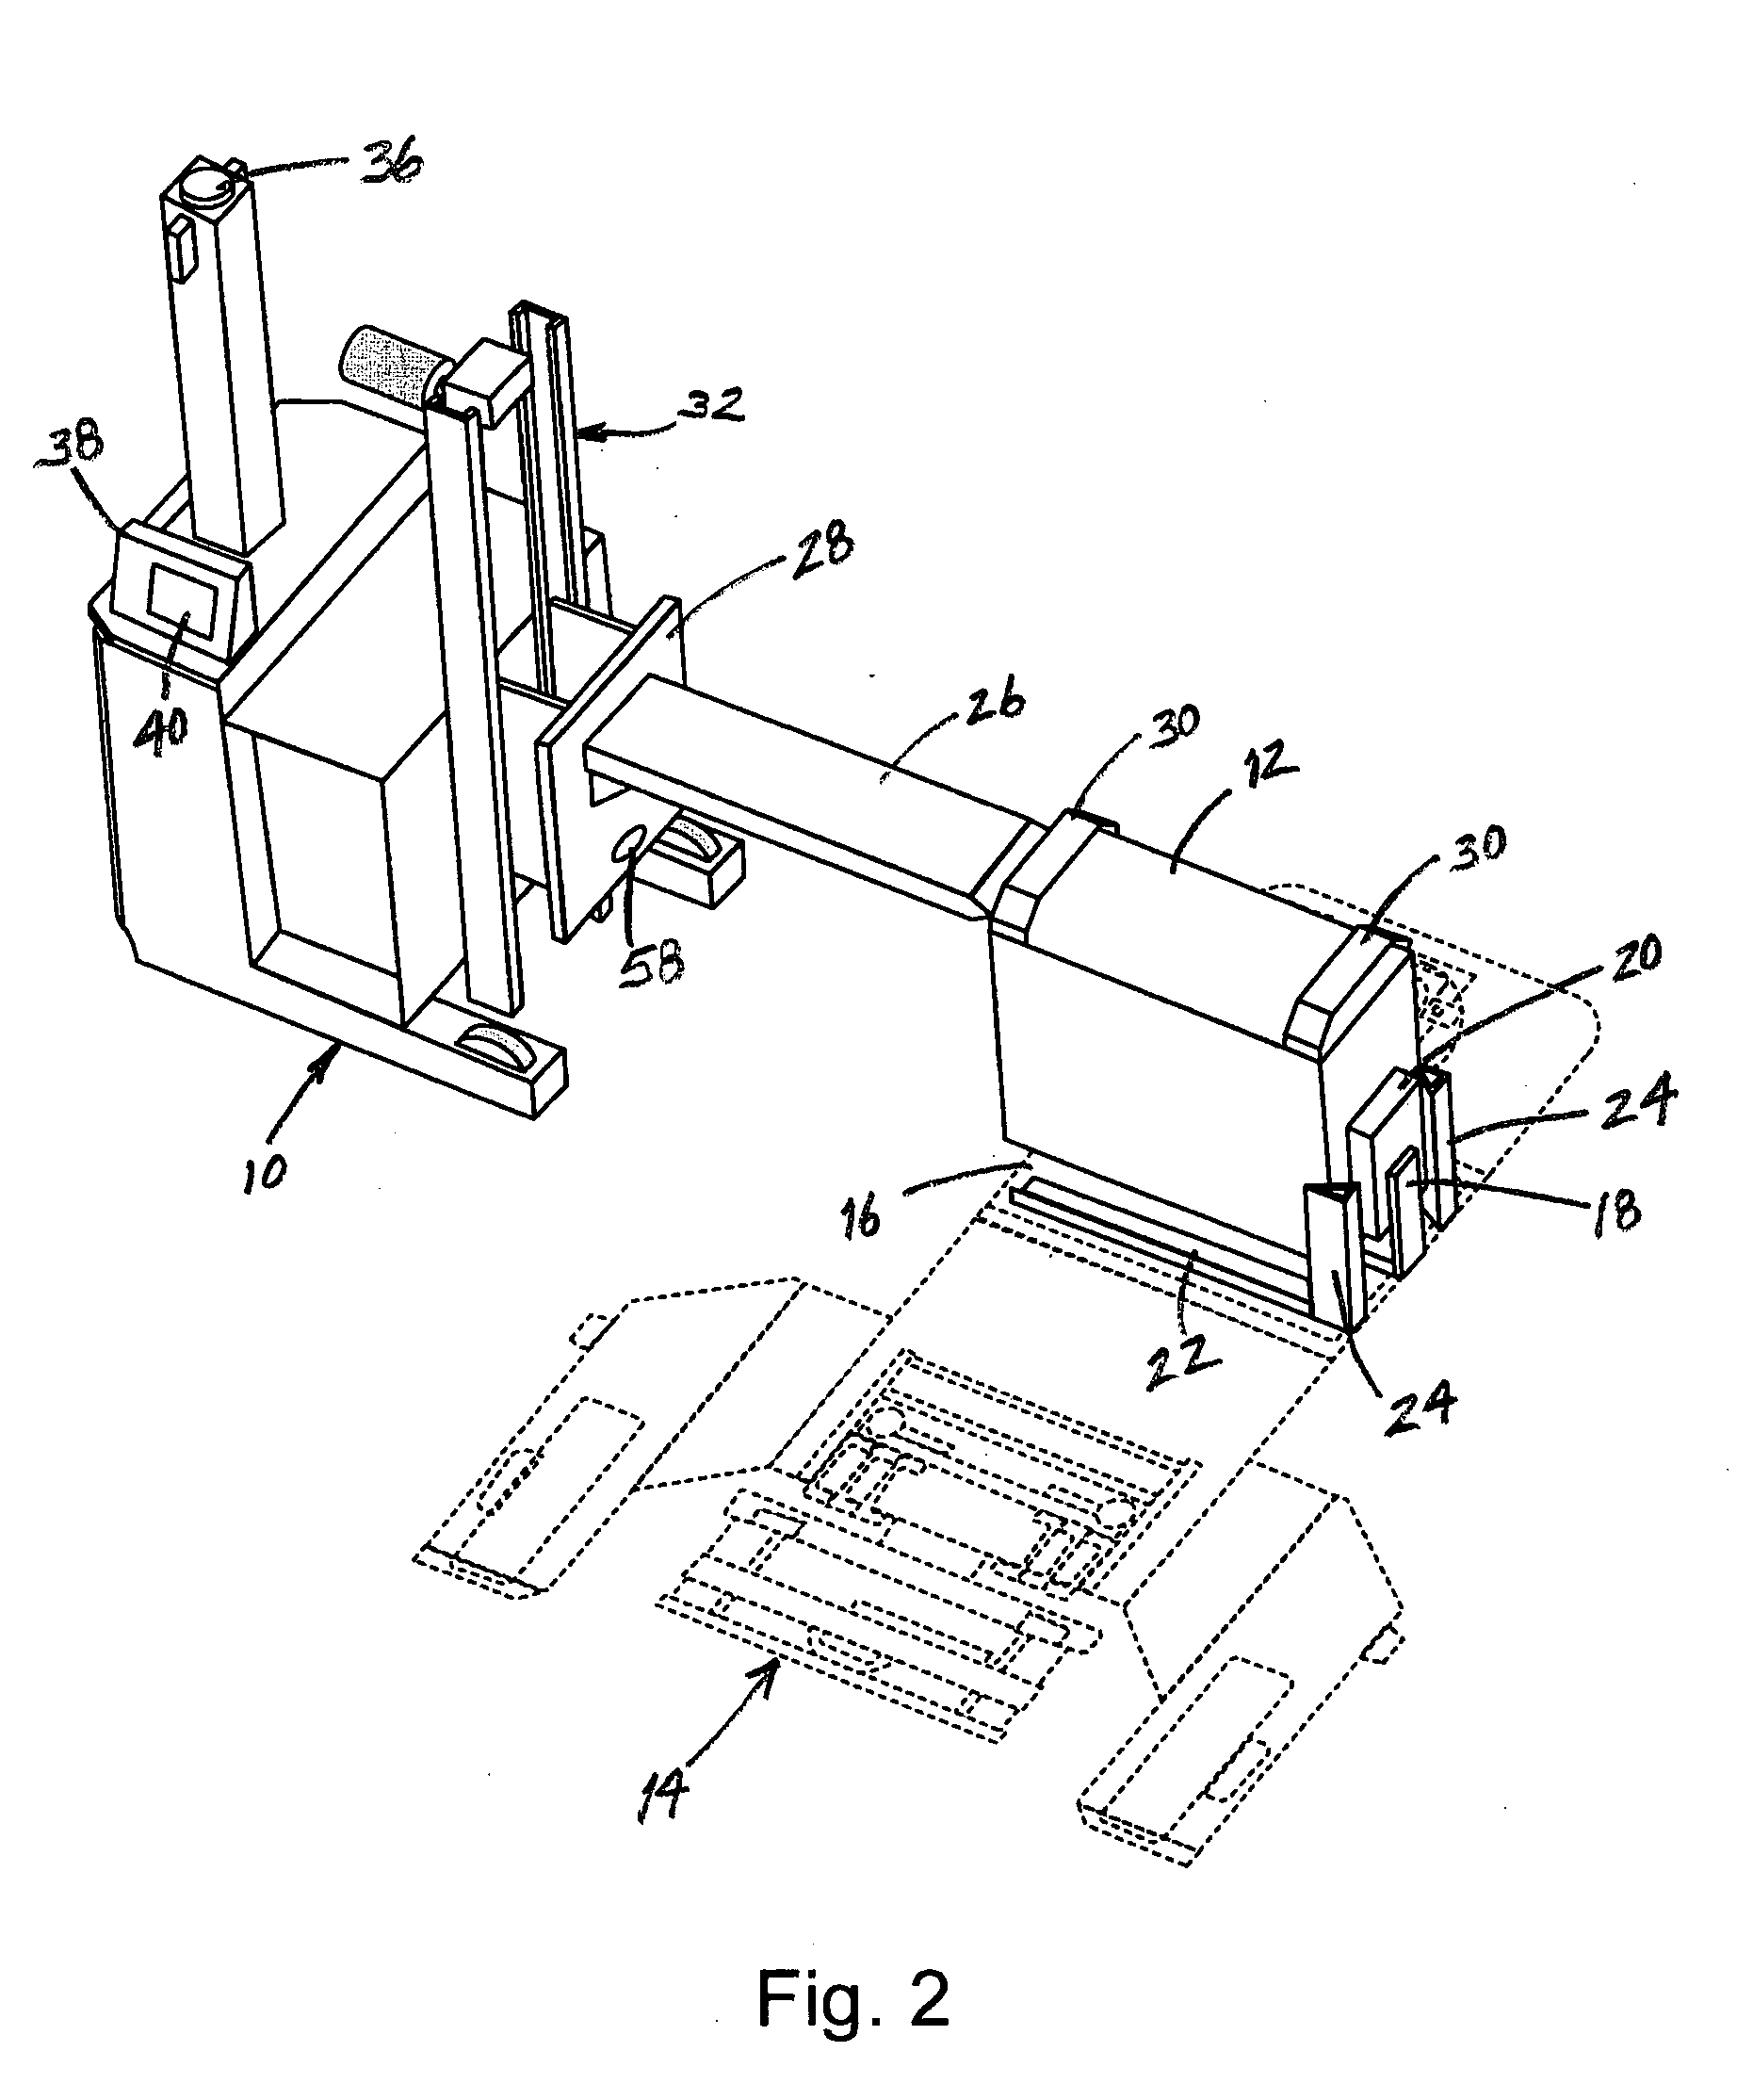 Automatic battery exchange system for mobile vehicles